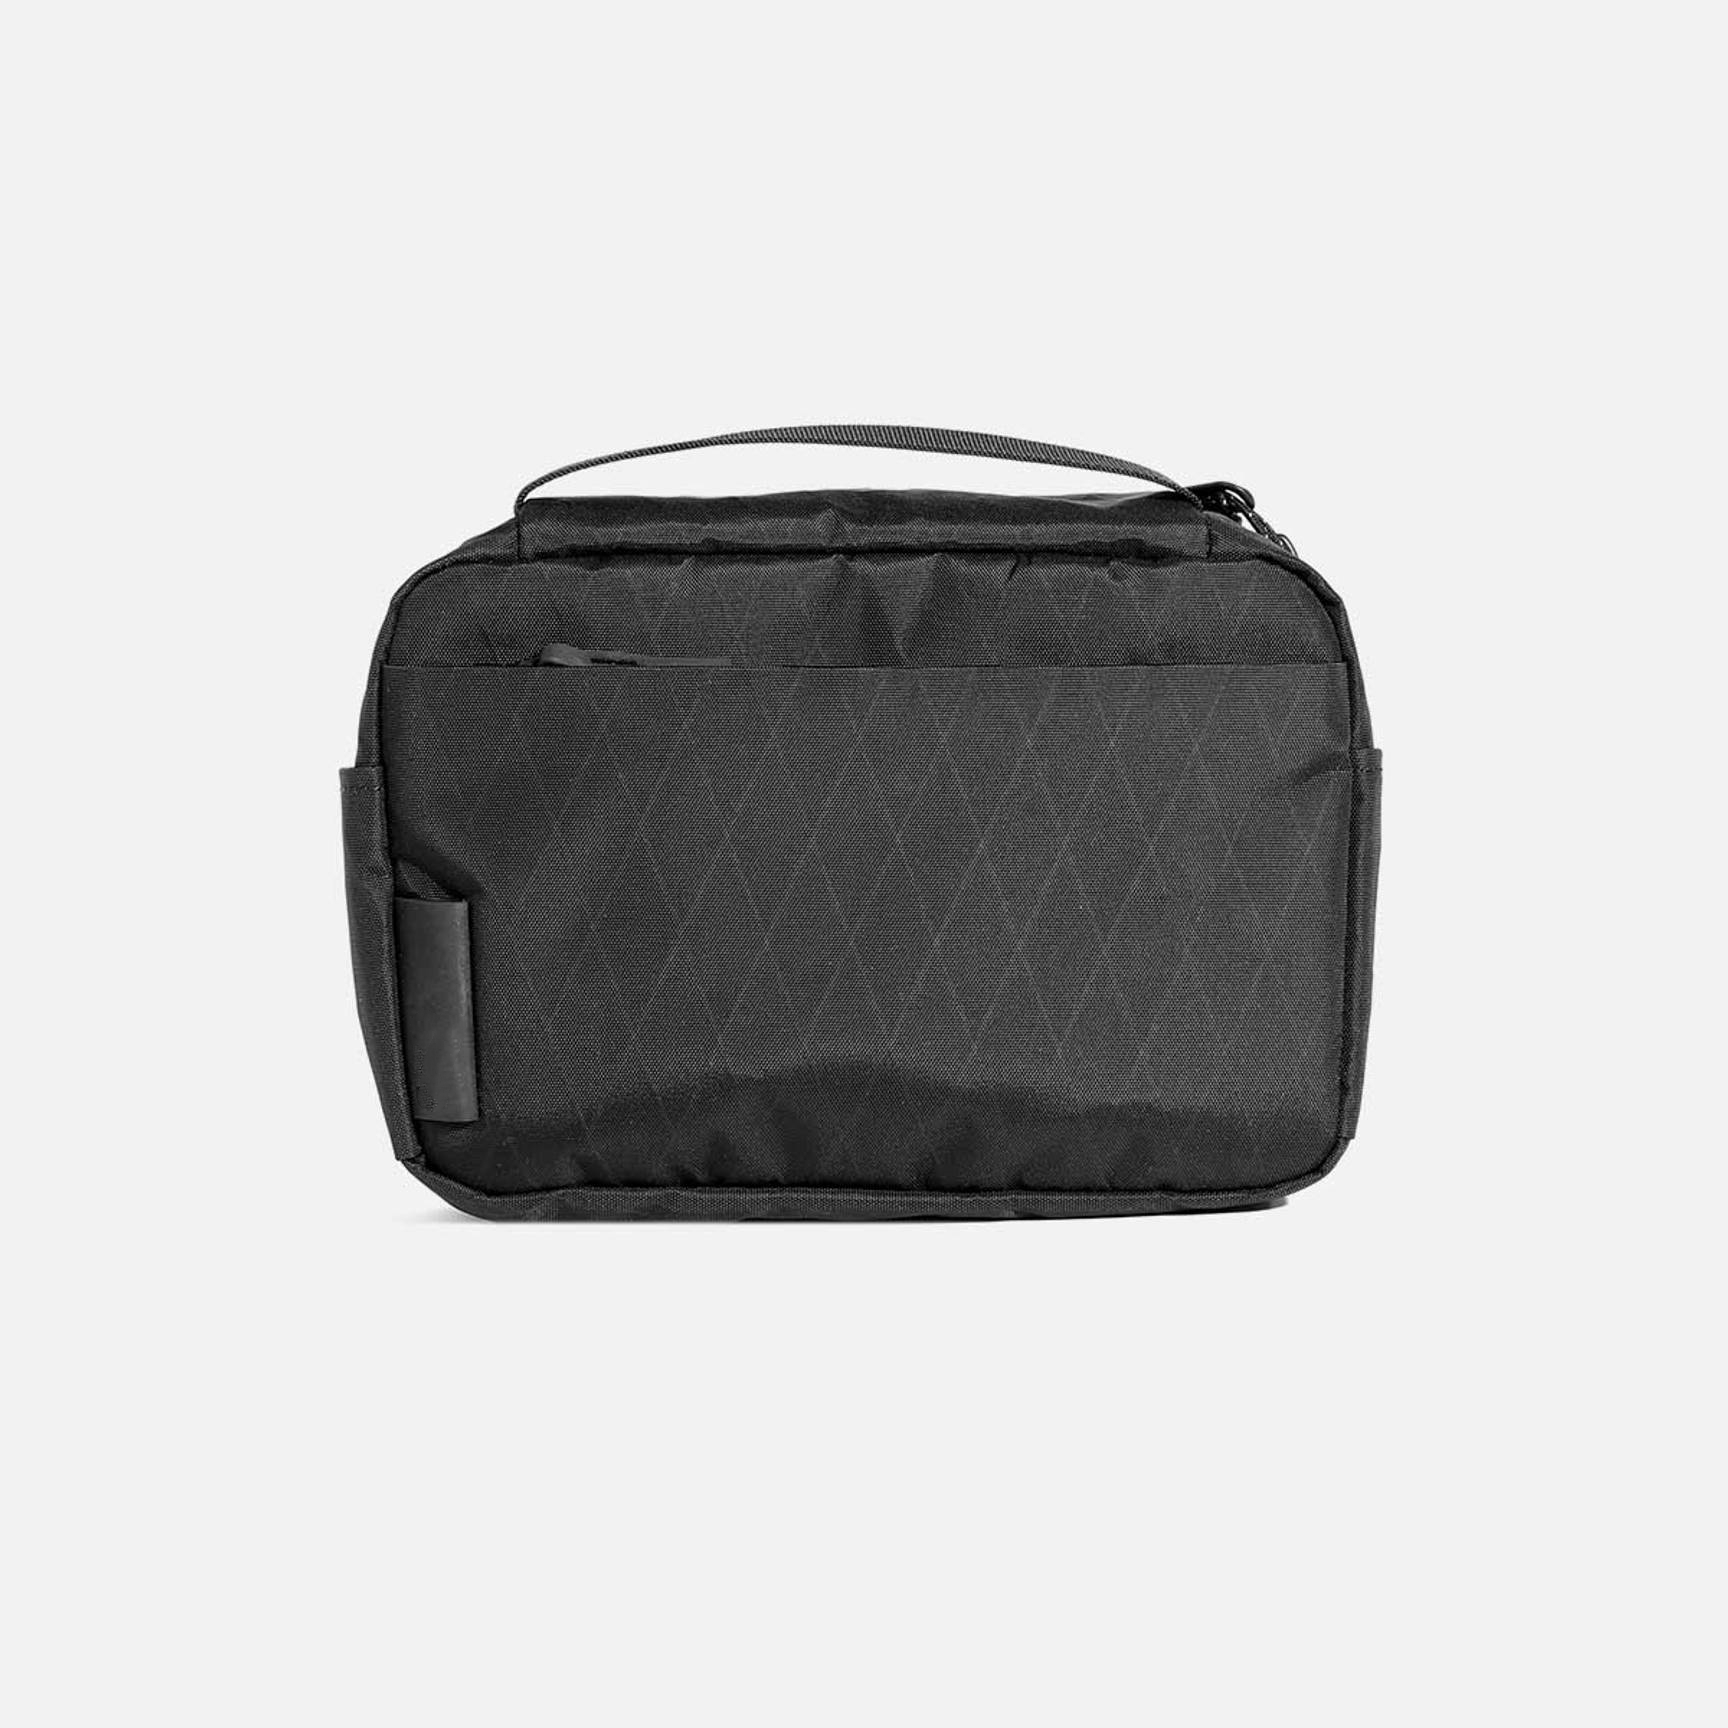 Waterproof Portable Travel Toiletry Bag Product Details